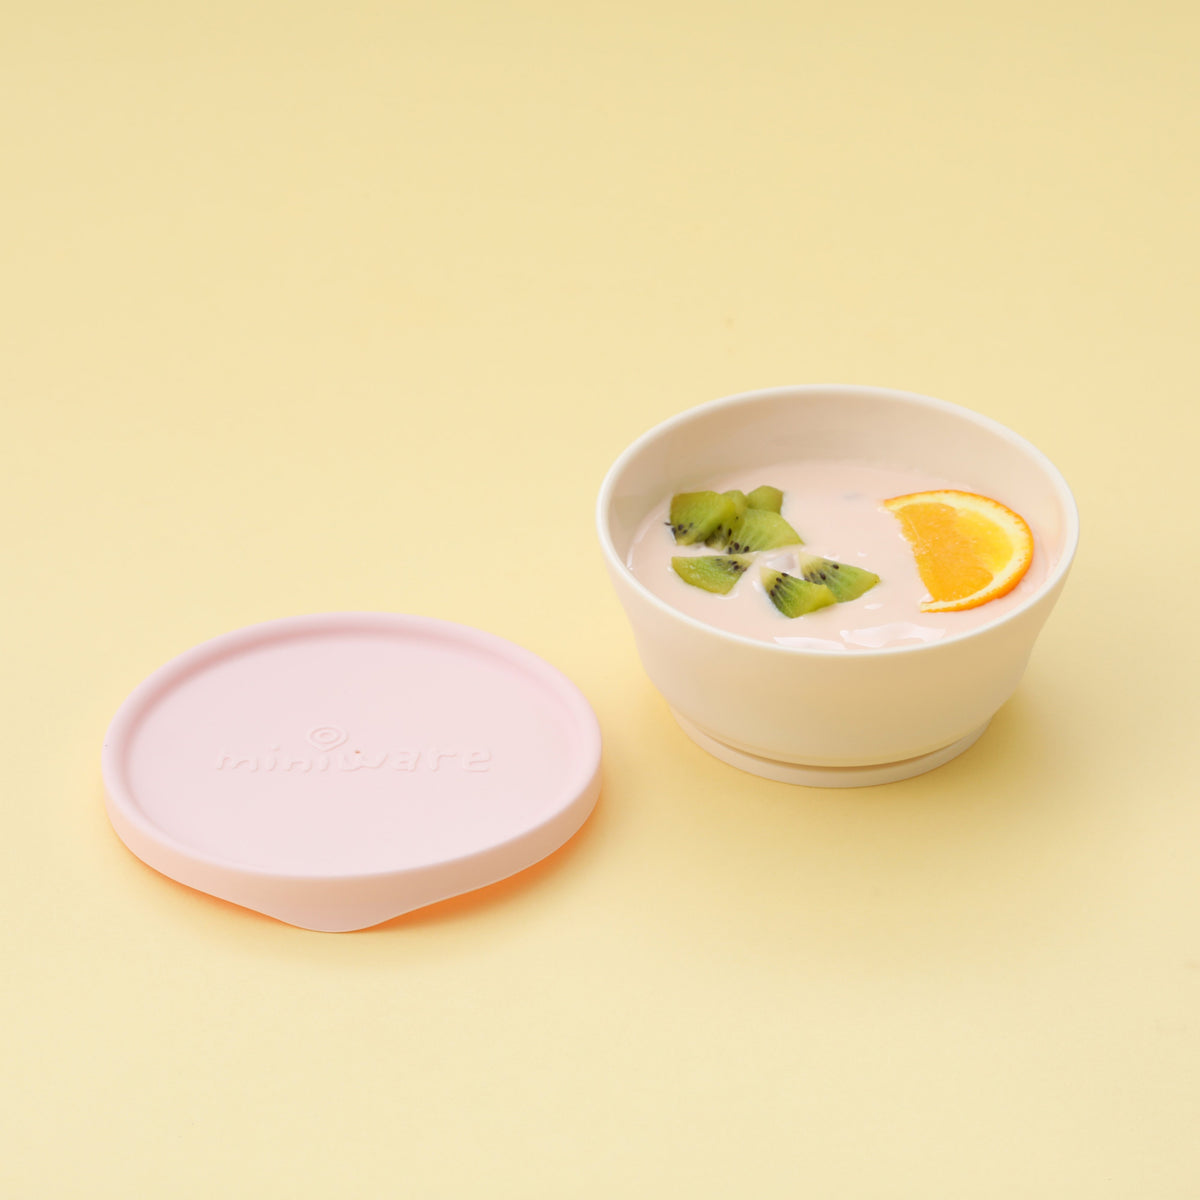 miniware-first-bite-set-pla-cereal-suction-bowl-vanilla-+-silicone-spoon-and-cover-in-cotton-candy- (11)